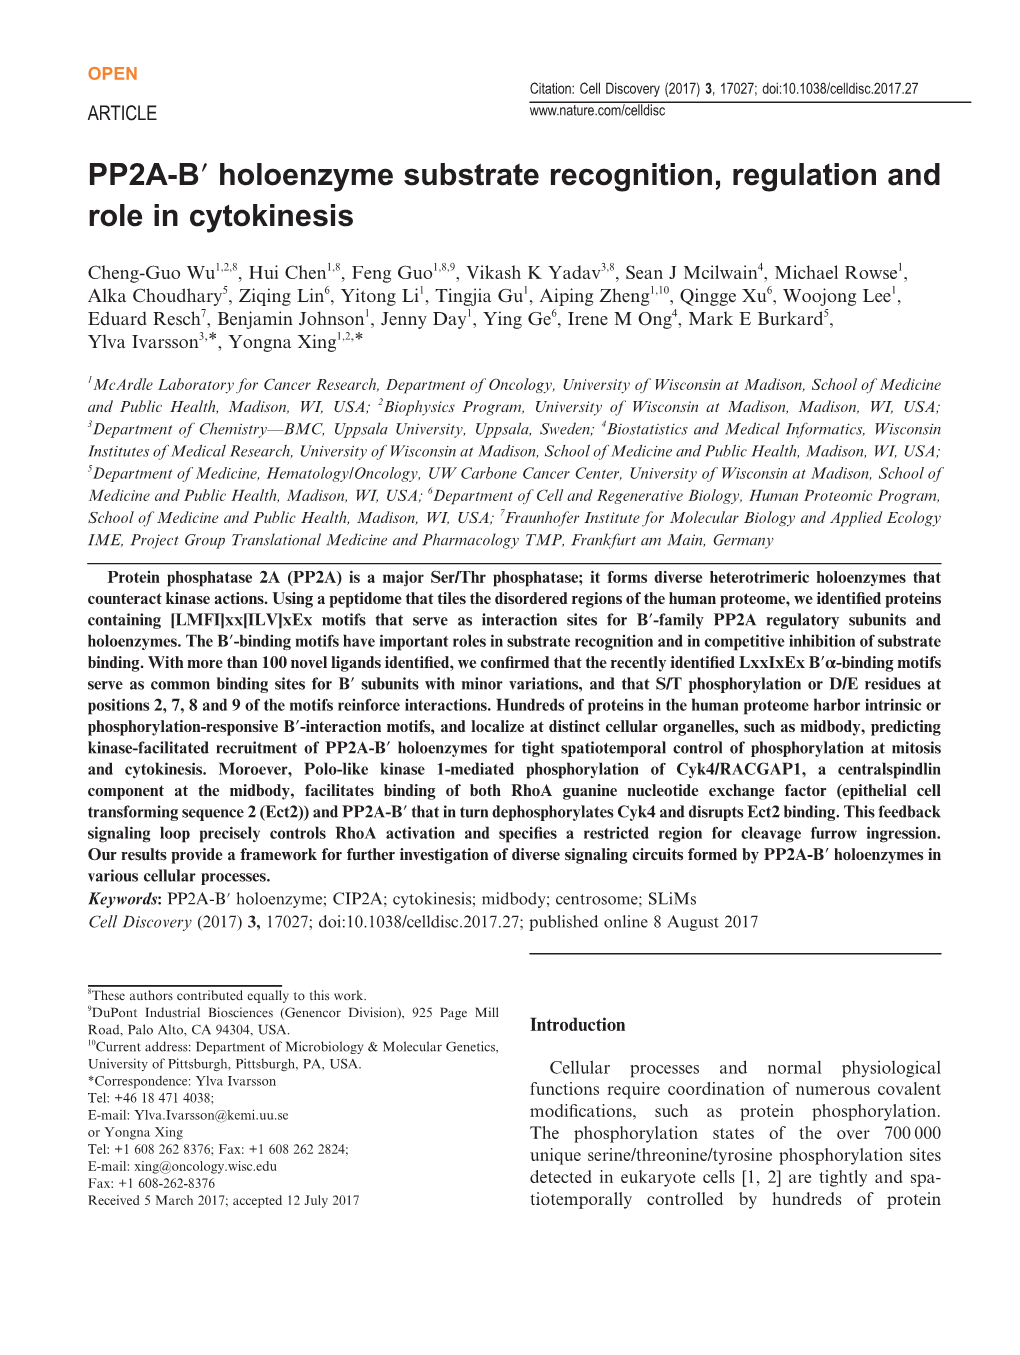 PP2A-B′ Holoenzyme Substrate Recognition, Regulation and Role in Cytokinesis